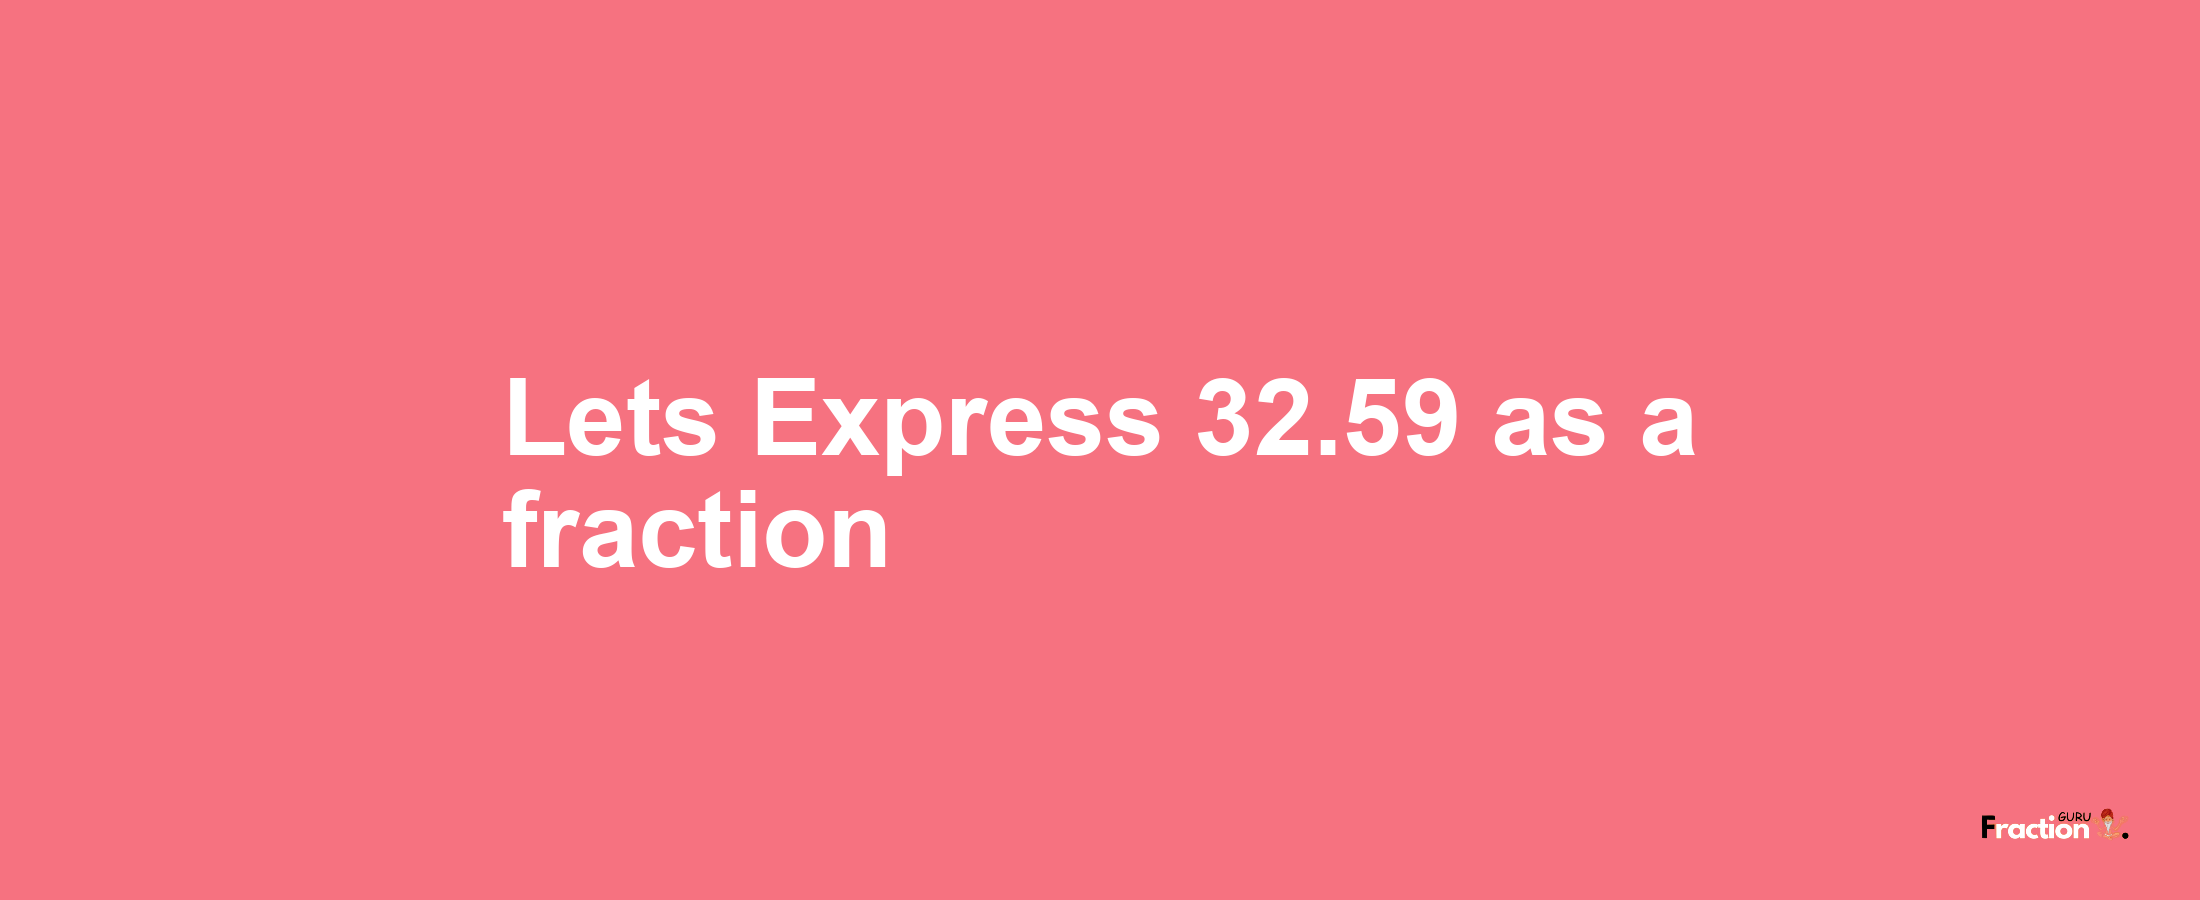 Lets Express 32.59 as afraction